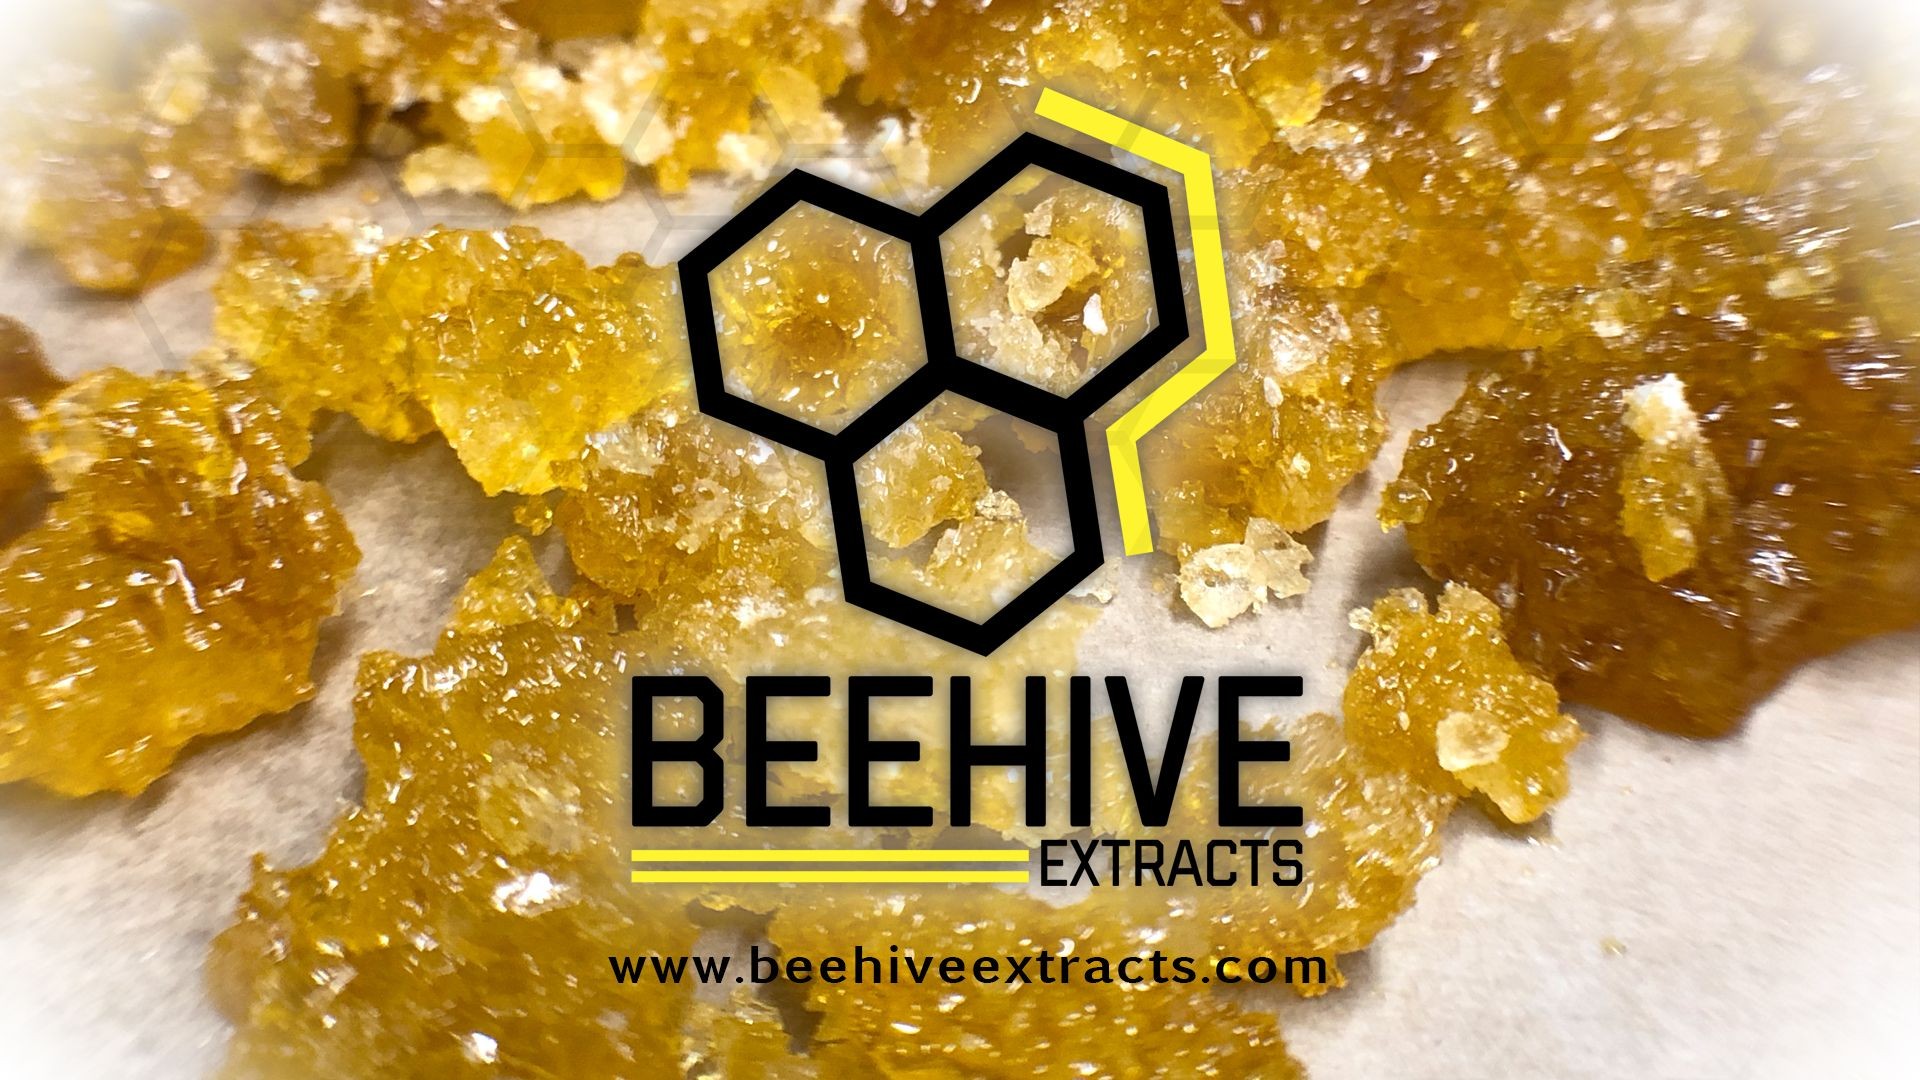 Beehive Extracts Restocked!! New Flavors!